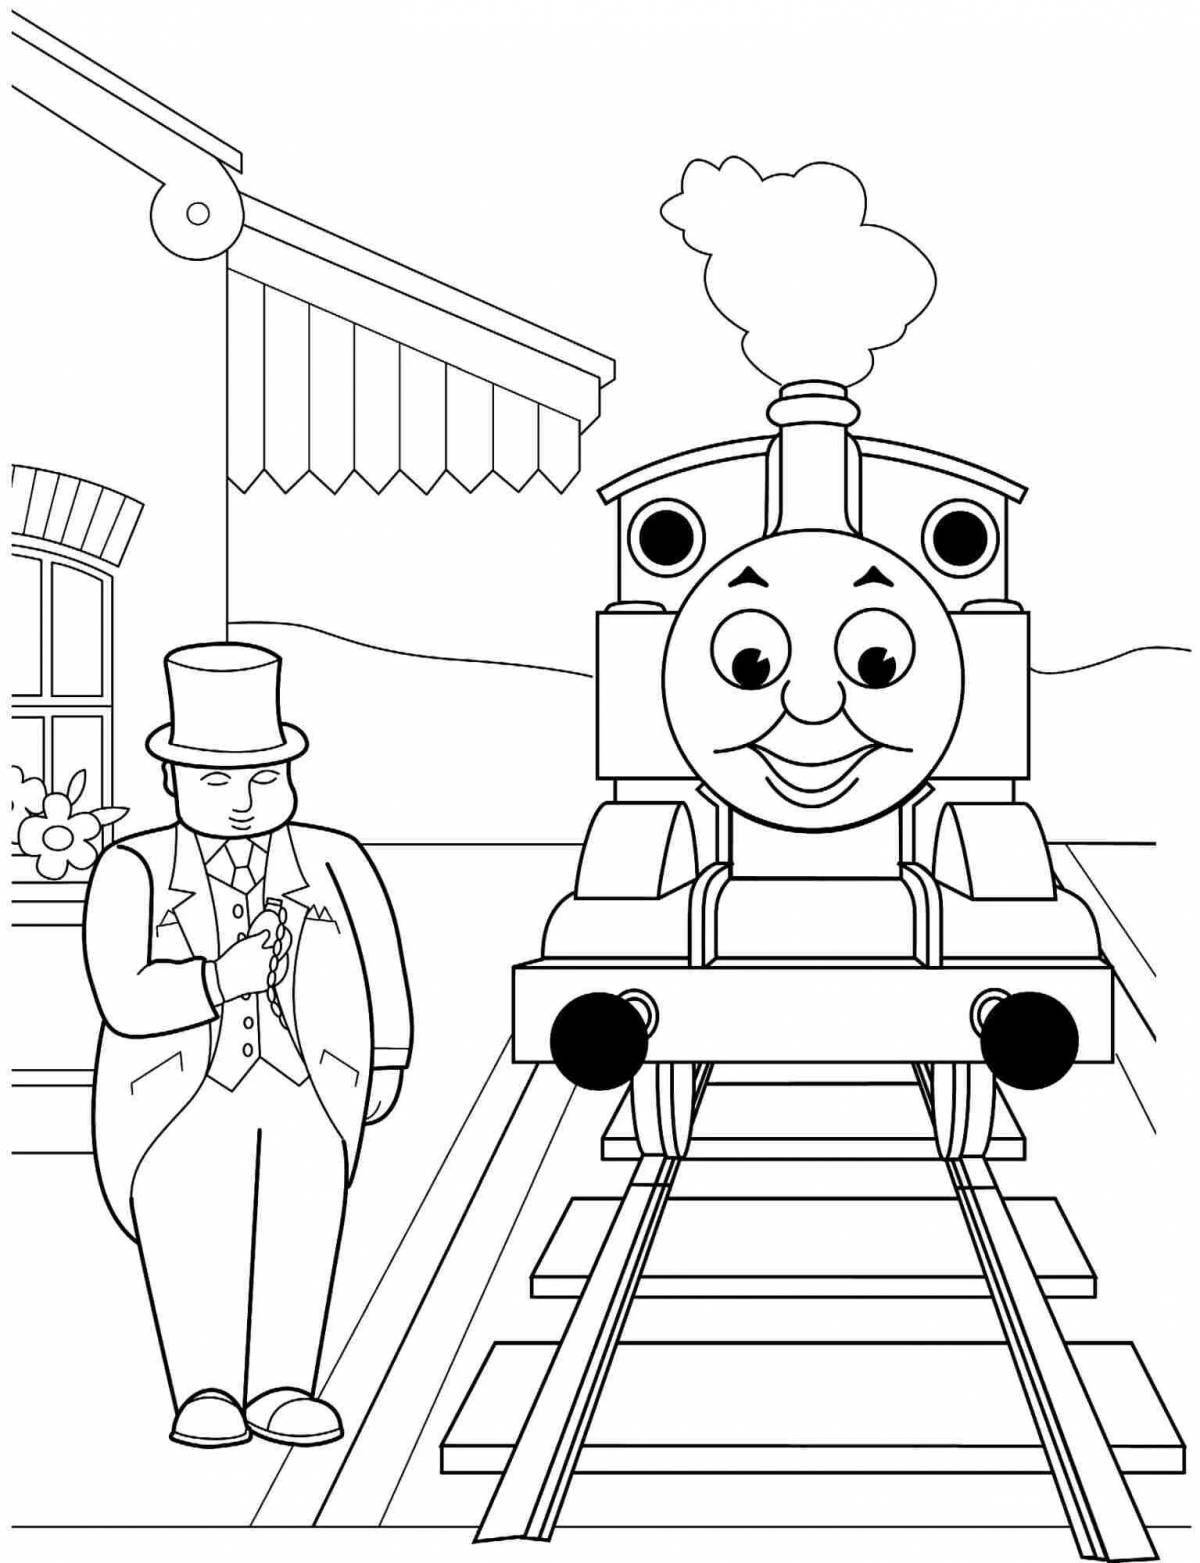 Rail Safety Coloring Page Bright Coloring Page